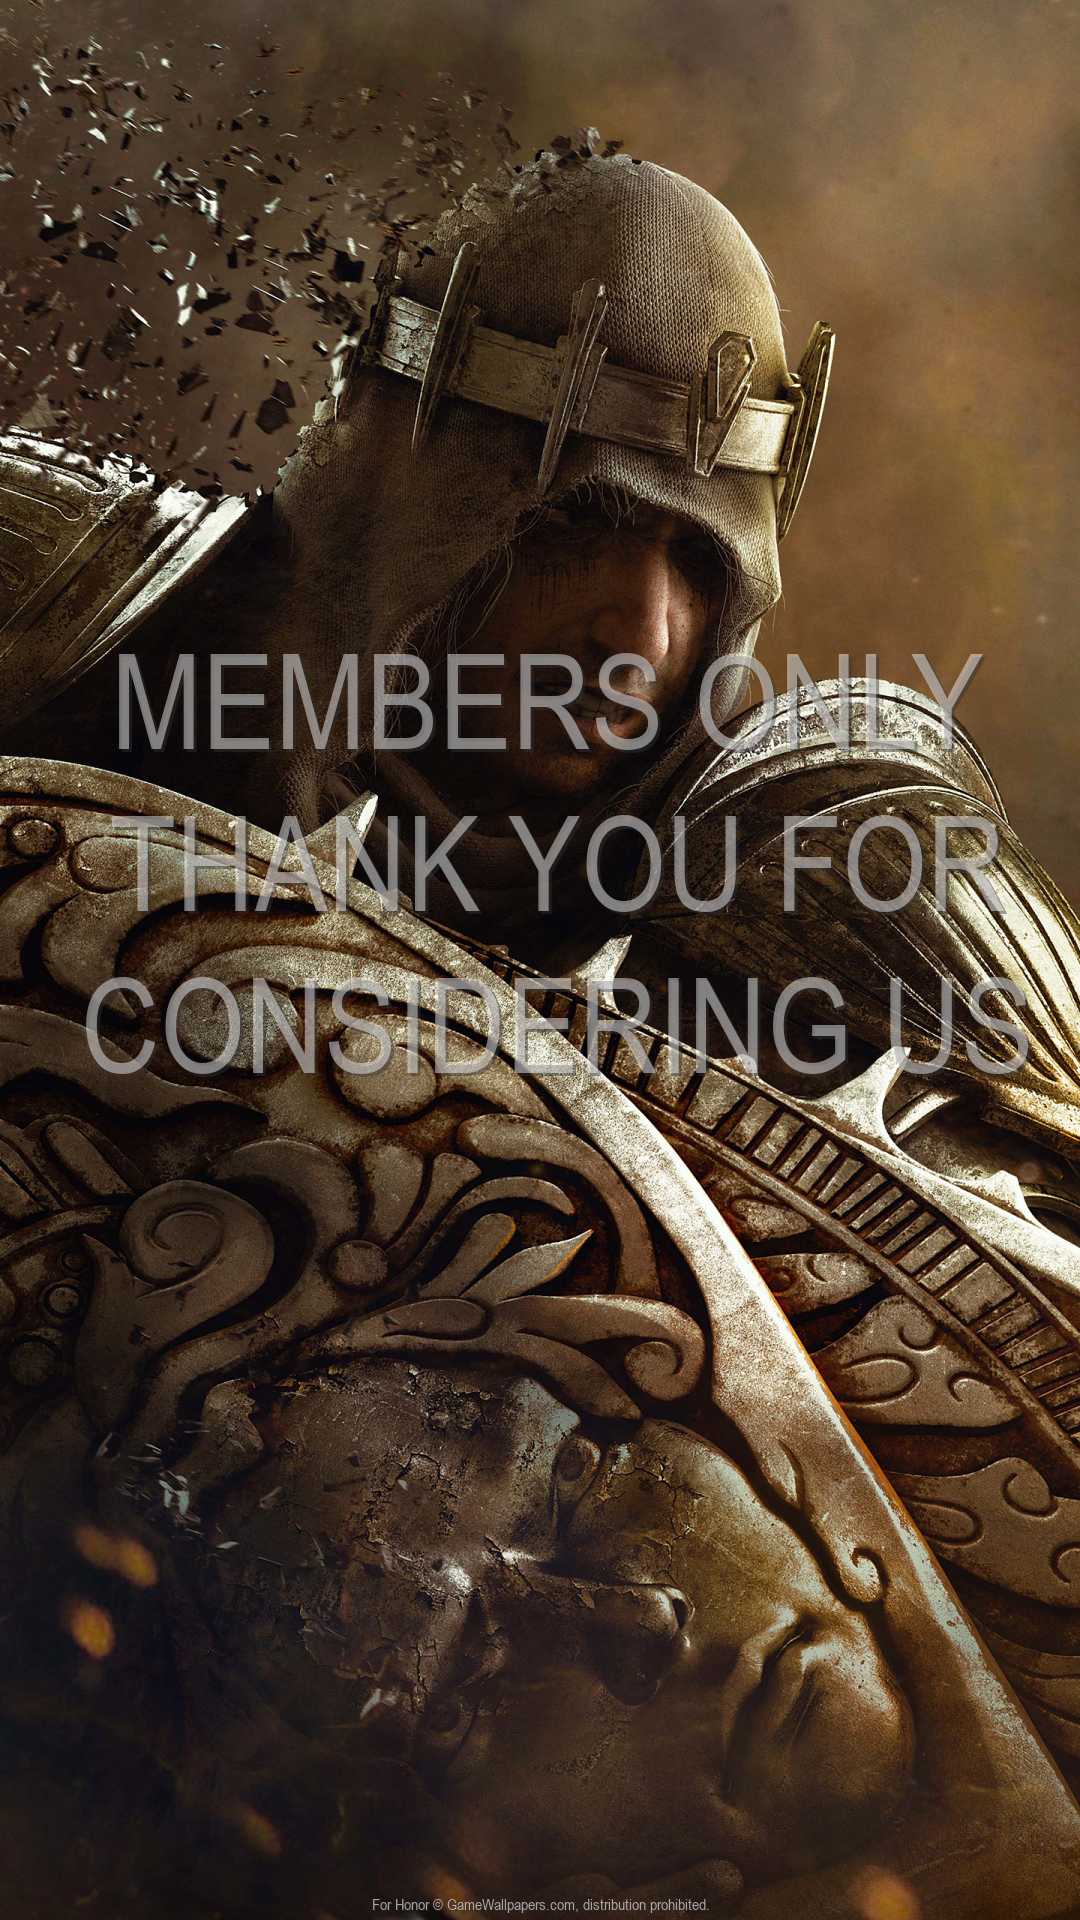 For Honor 1080p%20Vertical Mobile wallpaper or background 19